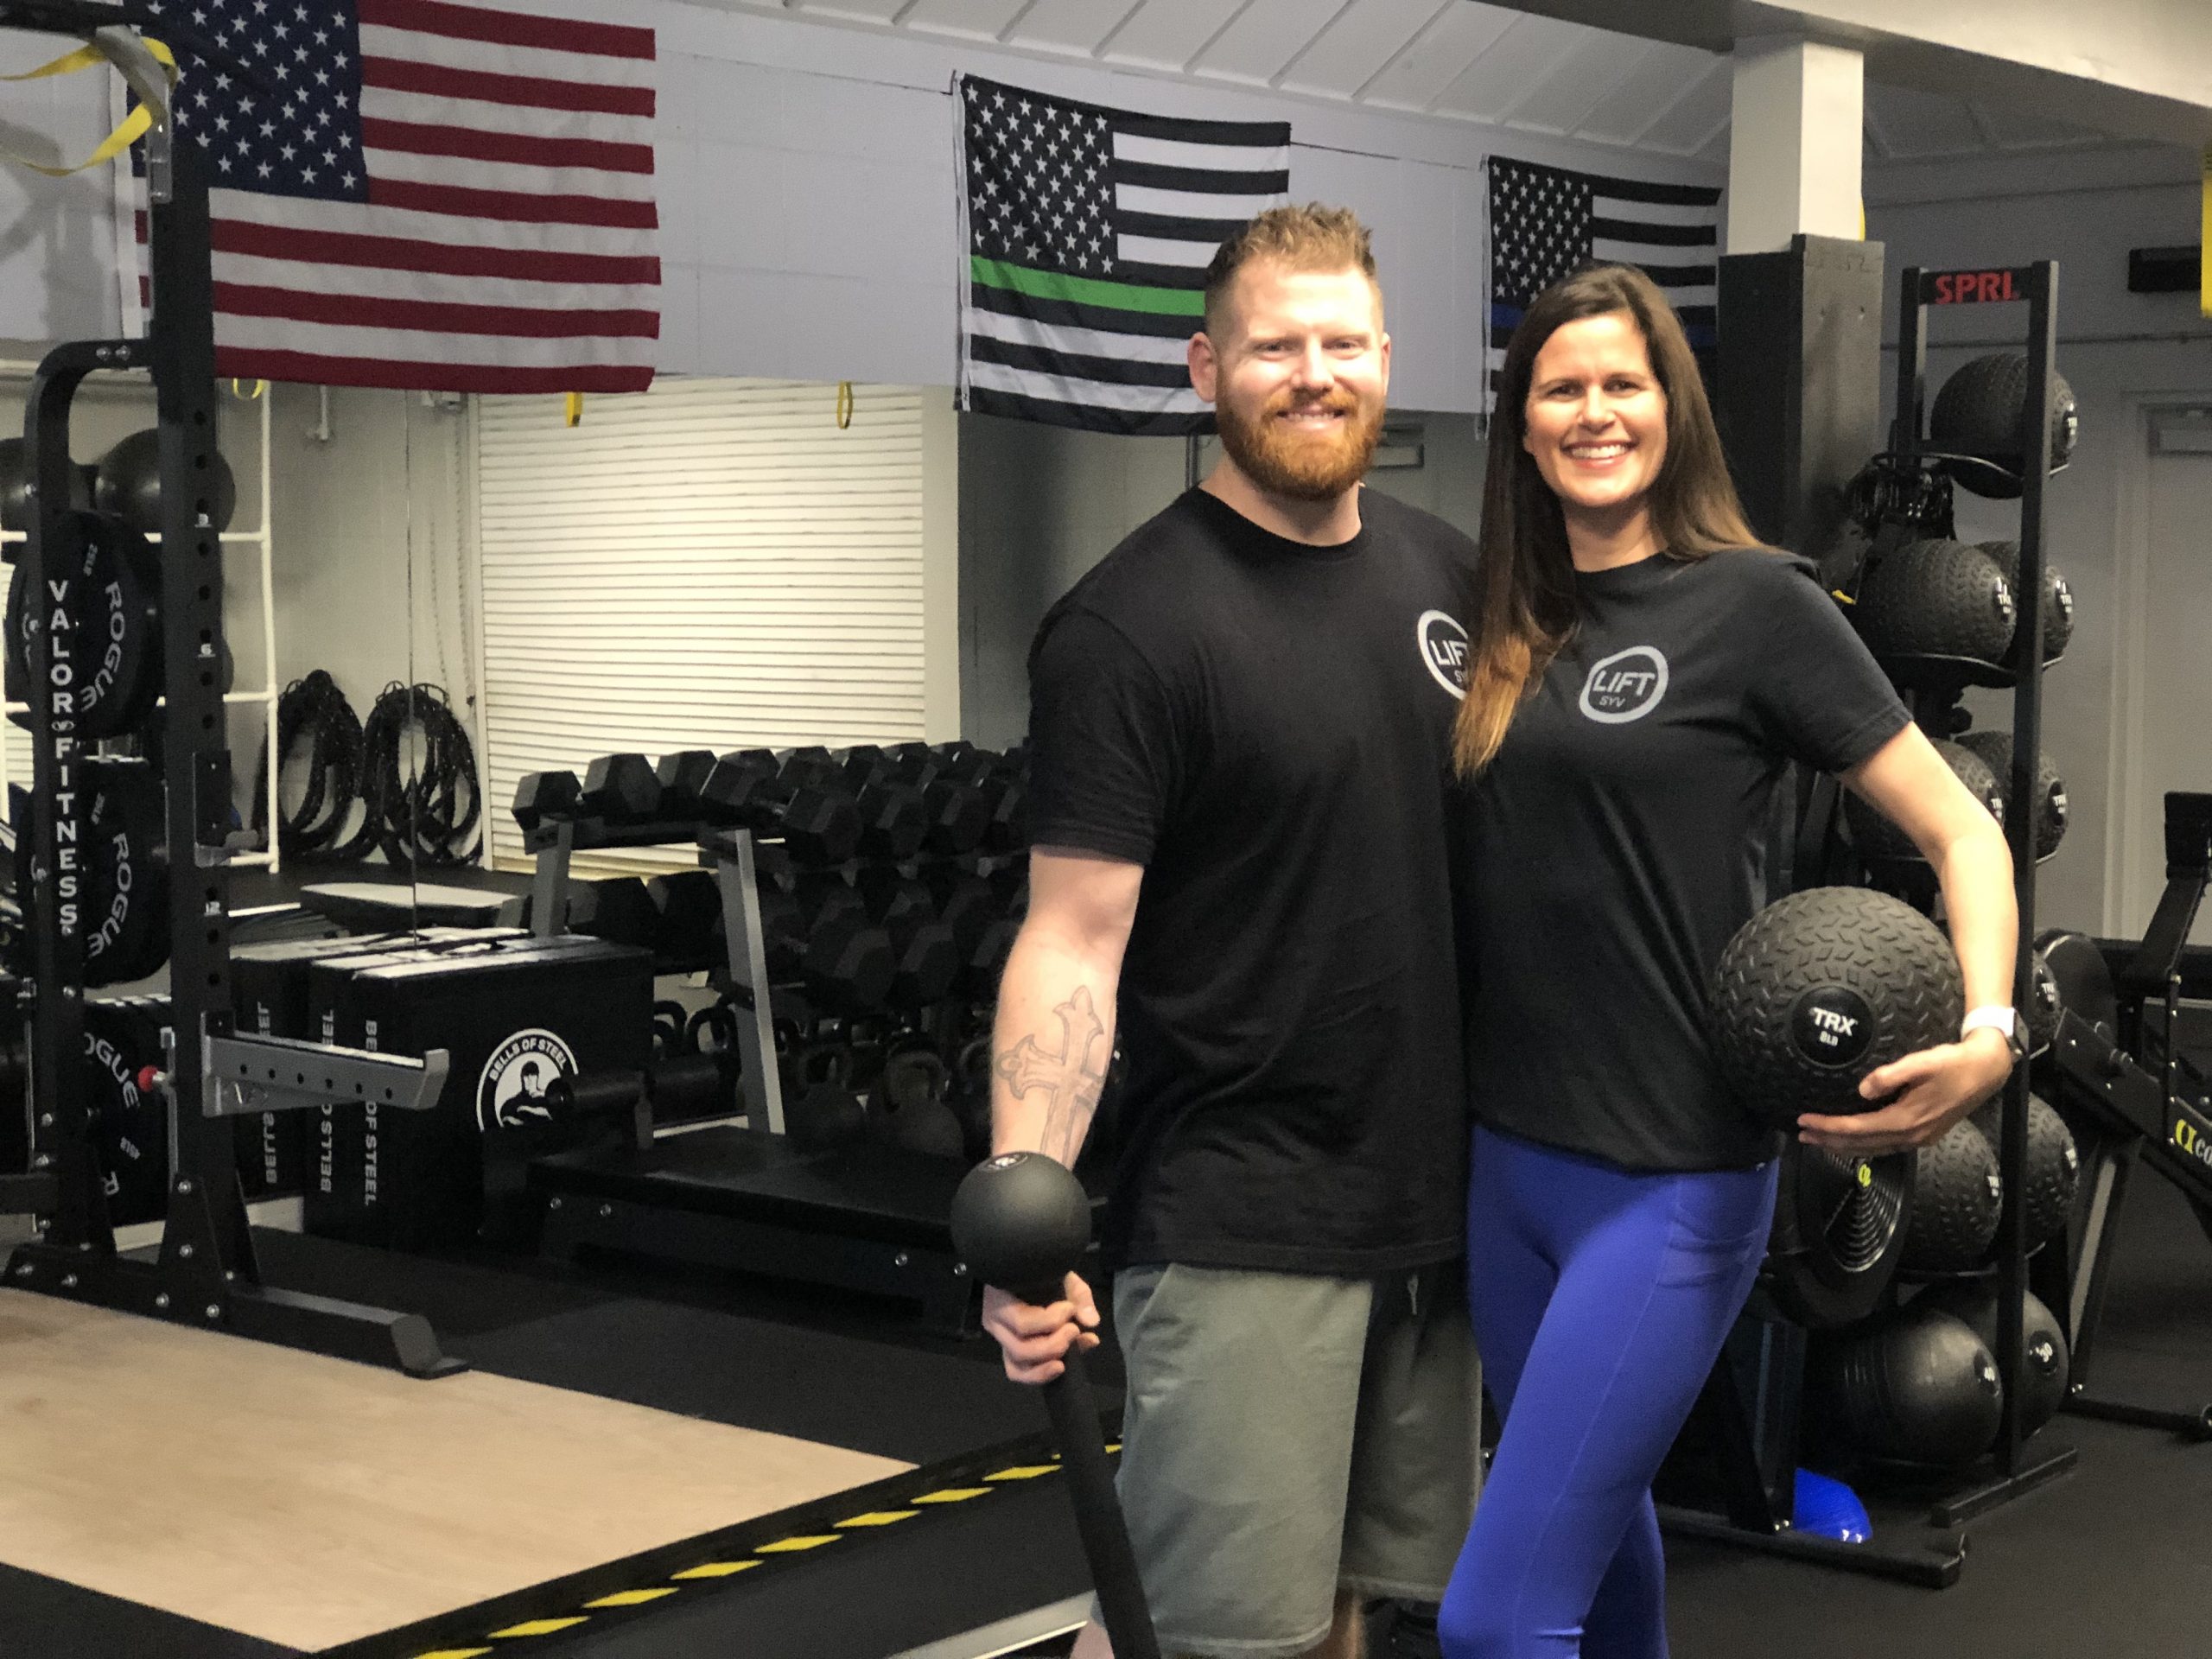 Local couple wants to give fitness clients a ‘Lift’